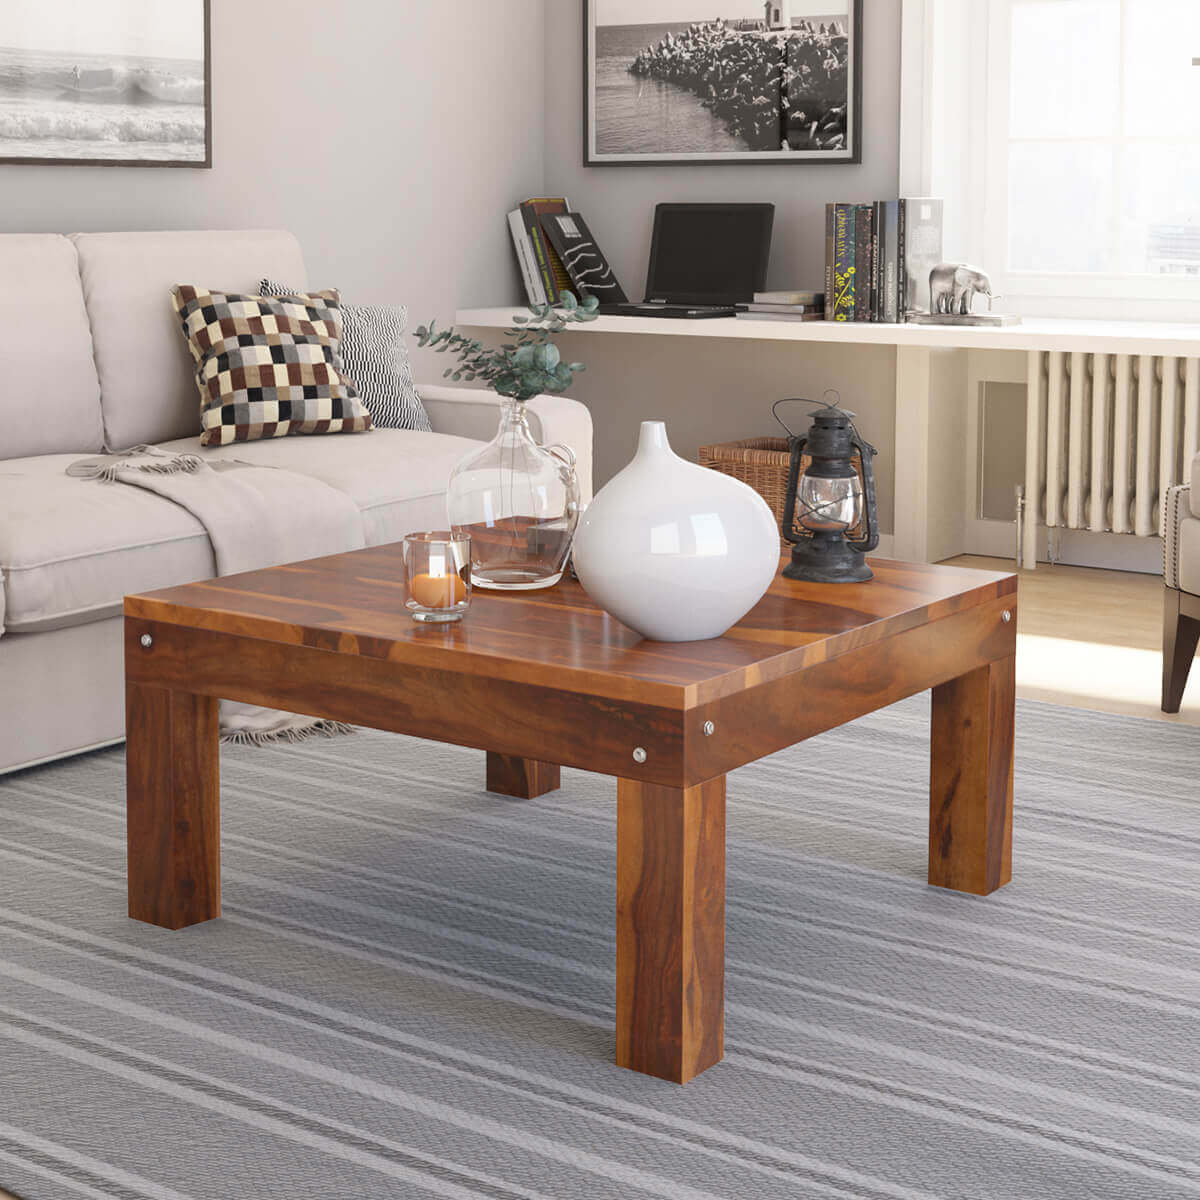 https://www.sierralivingconcepts.com/images/thumbs/0390614_patet-contemporary-rustic-solid-wood-cocktail-square-coffee-table.jpeg